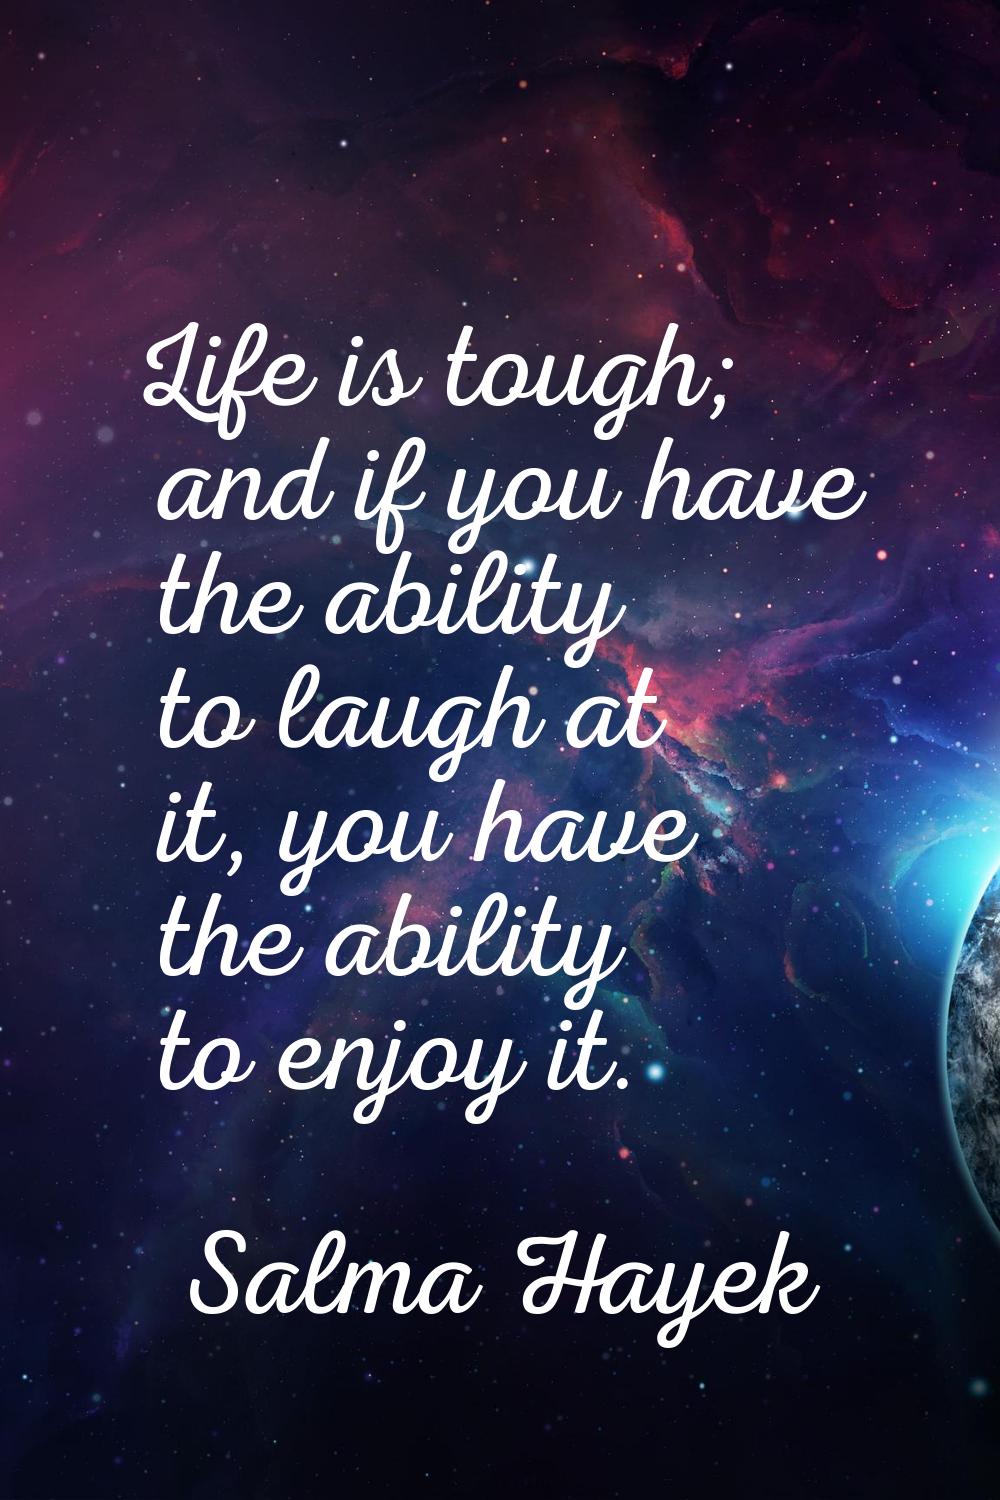 Life is tough; and if you have the ability to laugh at it, you have the ability to enjoy it.